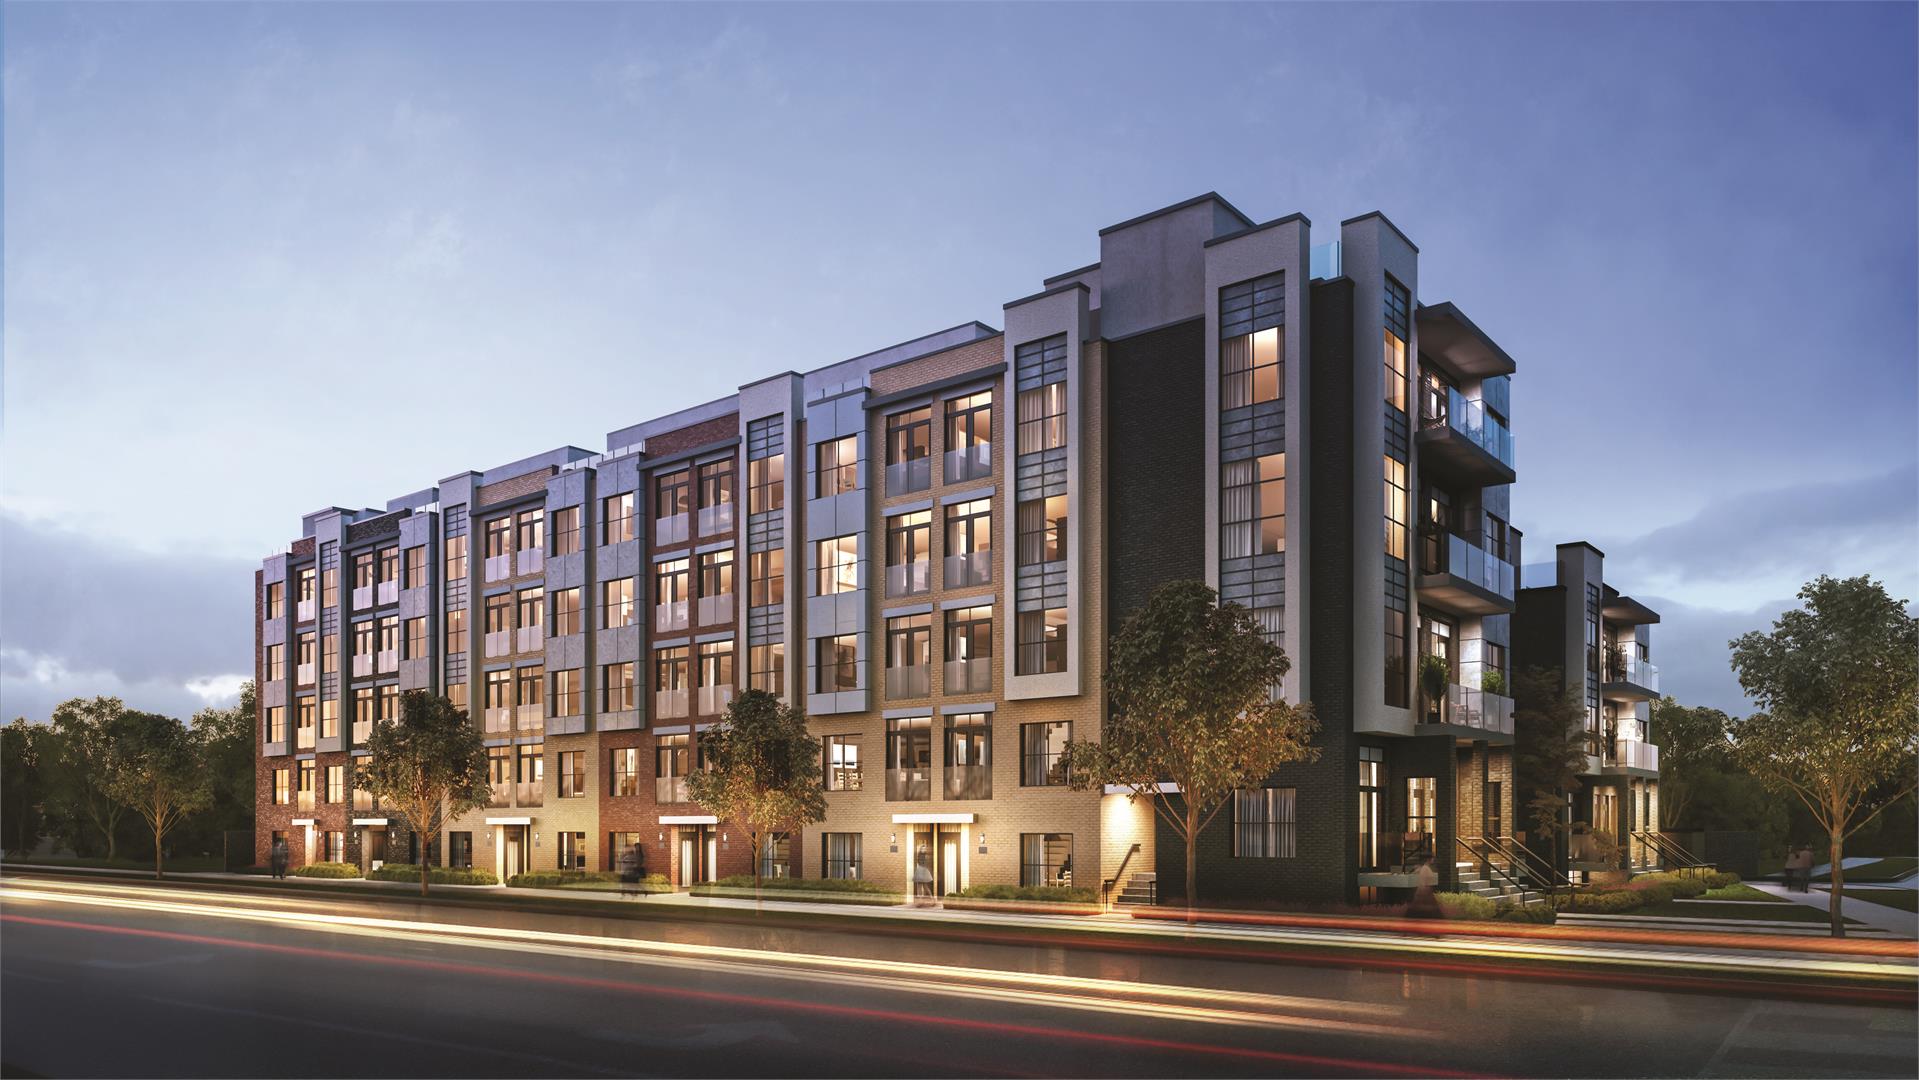 Rendering of Harrington Residences building exterior at dusk with streetscape.